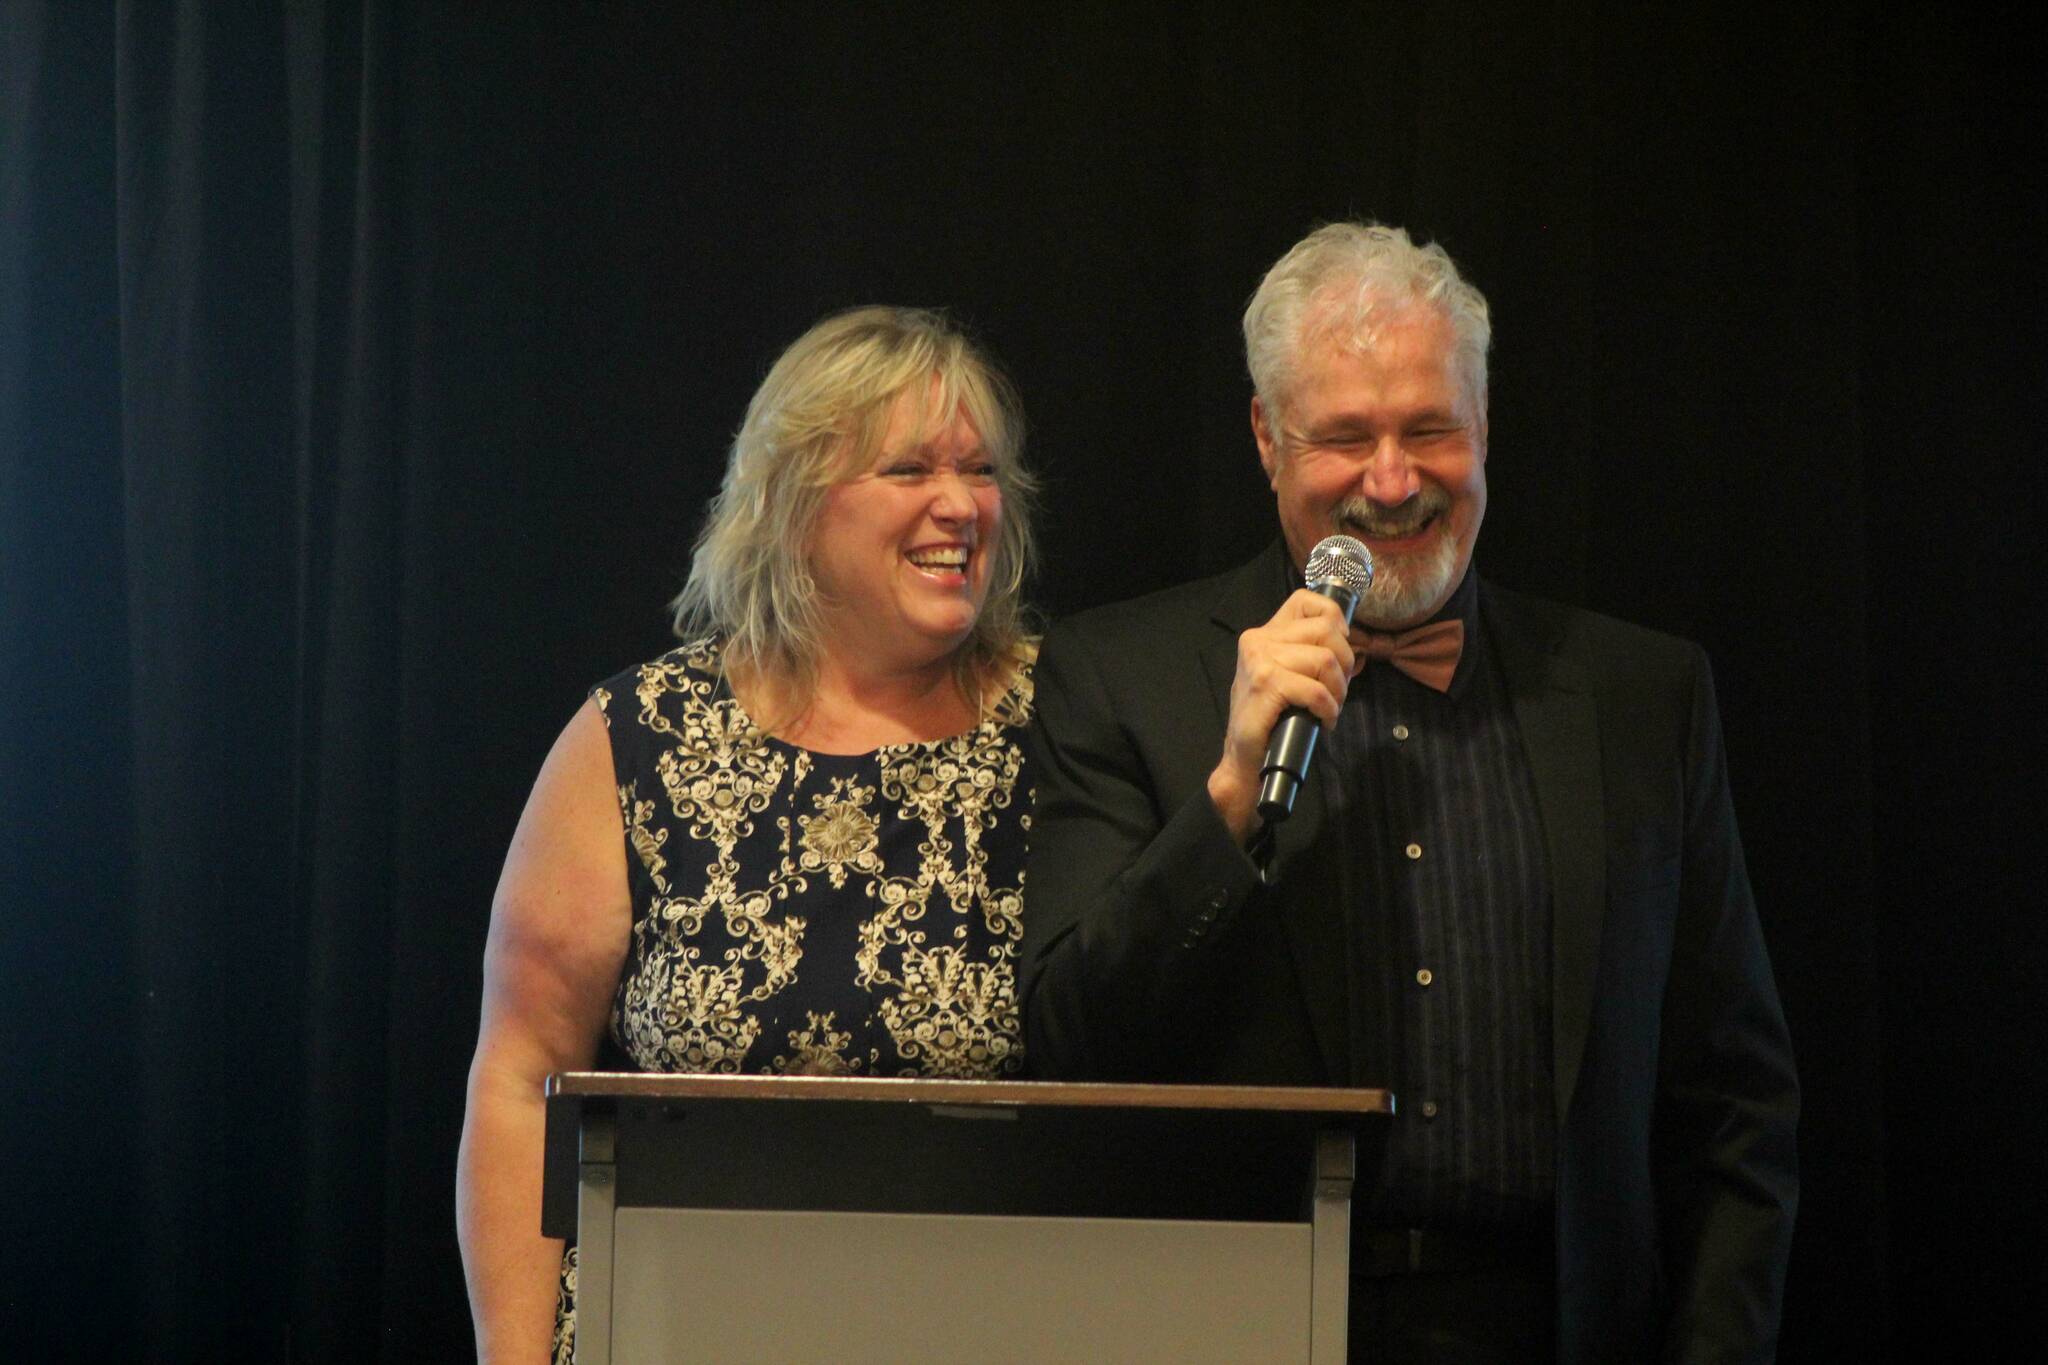 Conor Wilson / Valley Record
Clark and Karrie Roberts, behind Valley-based nonprofit Ultimate Vision, speak at the opening of the Seeing & Sharing the Heart of Kindness Gala on Oct. 16 at the Hilton Garden Inn in Issaquah.